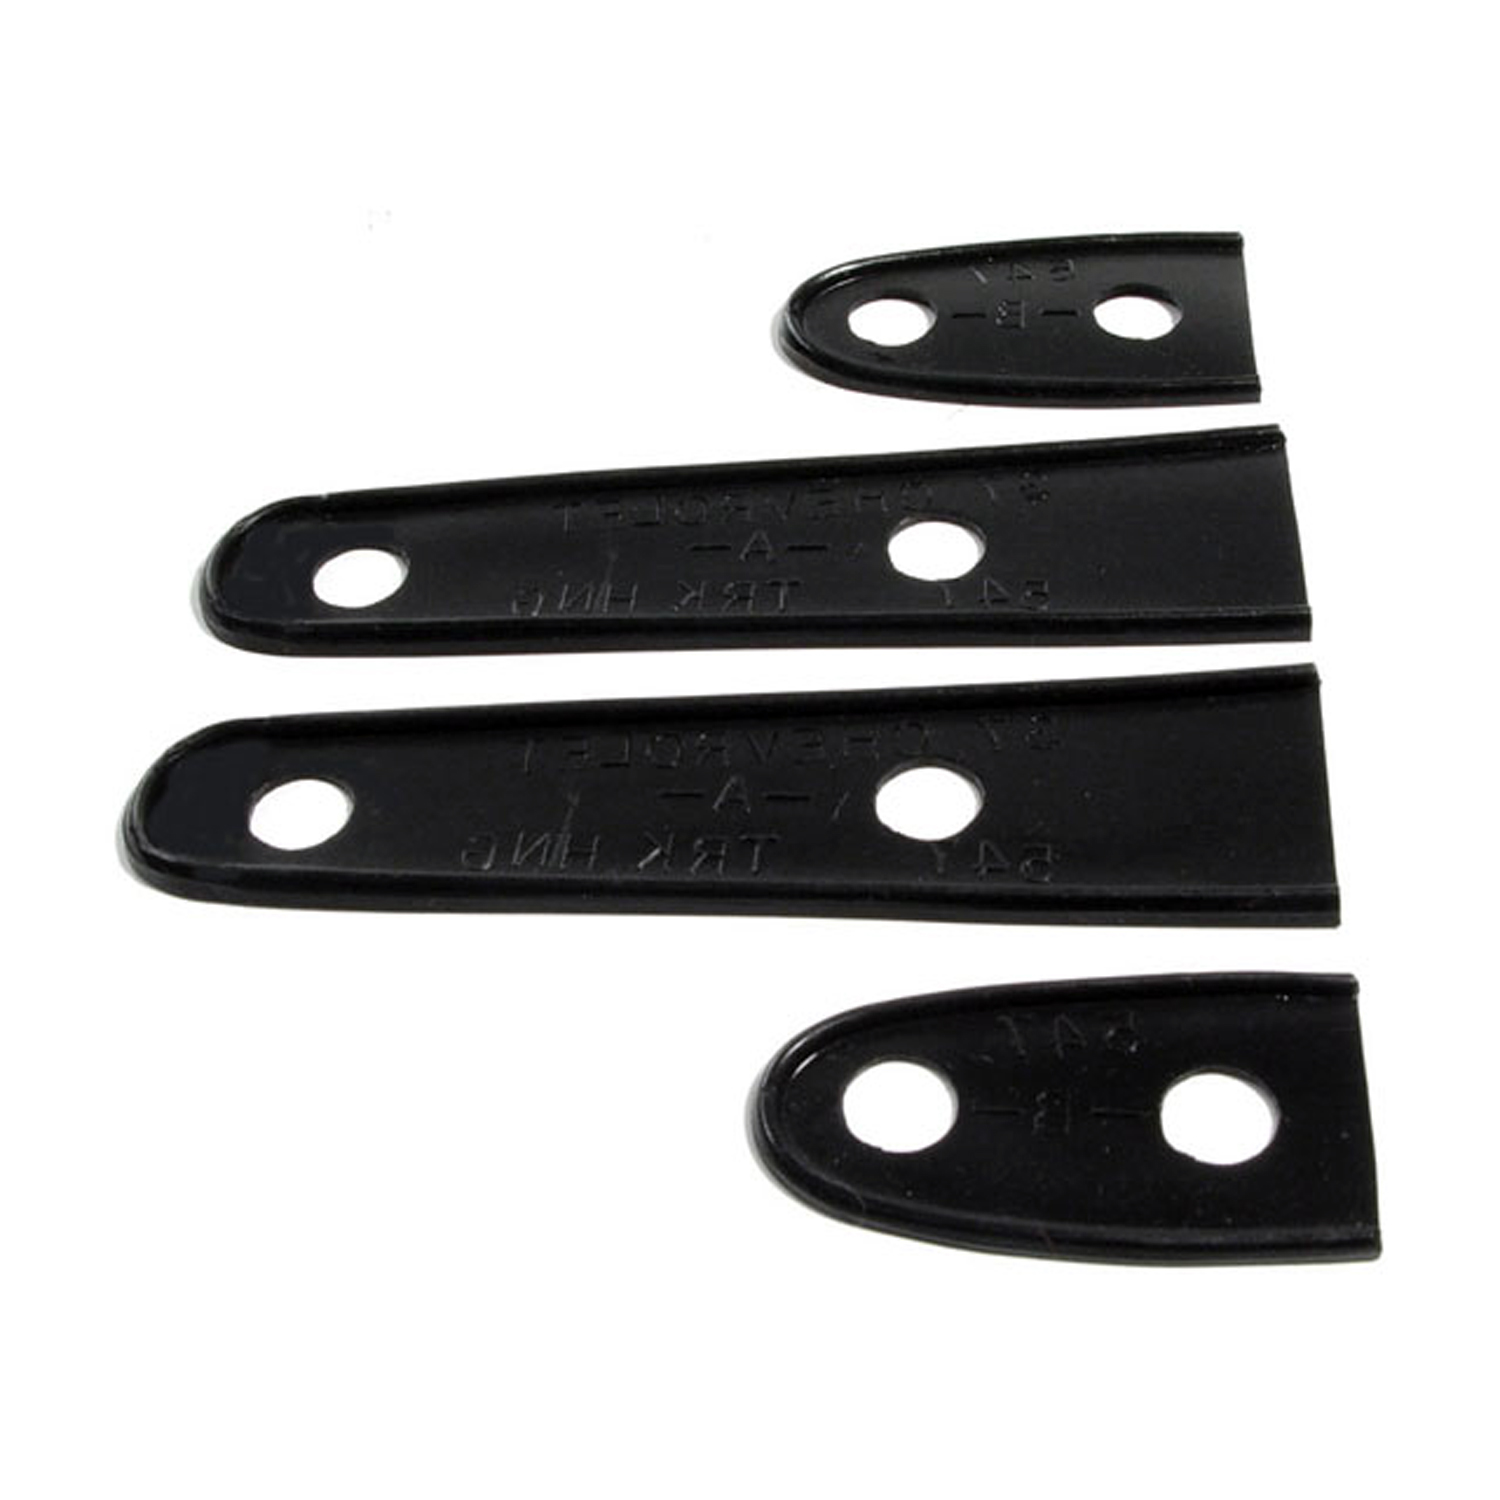 1939 Chevrolet Master 85 Trunk Hinge Pads.  1-3/8 wide X 7-3/4 long.  4-Piece Set-MP 547